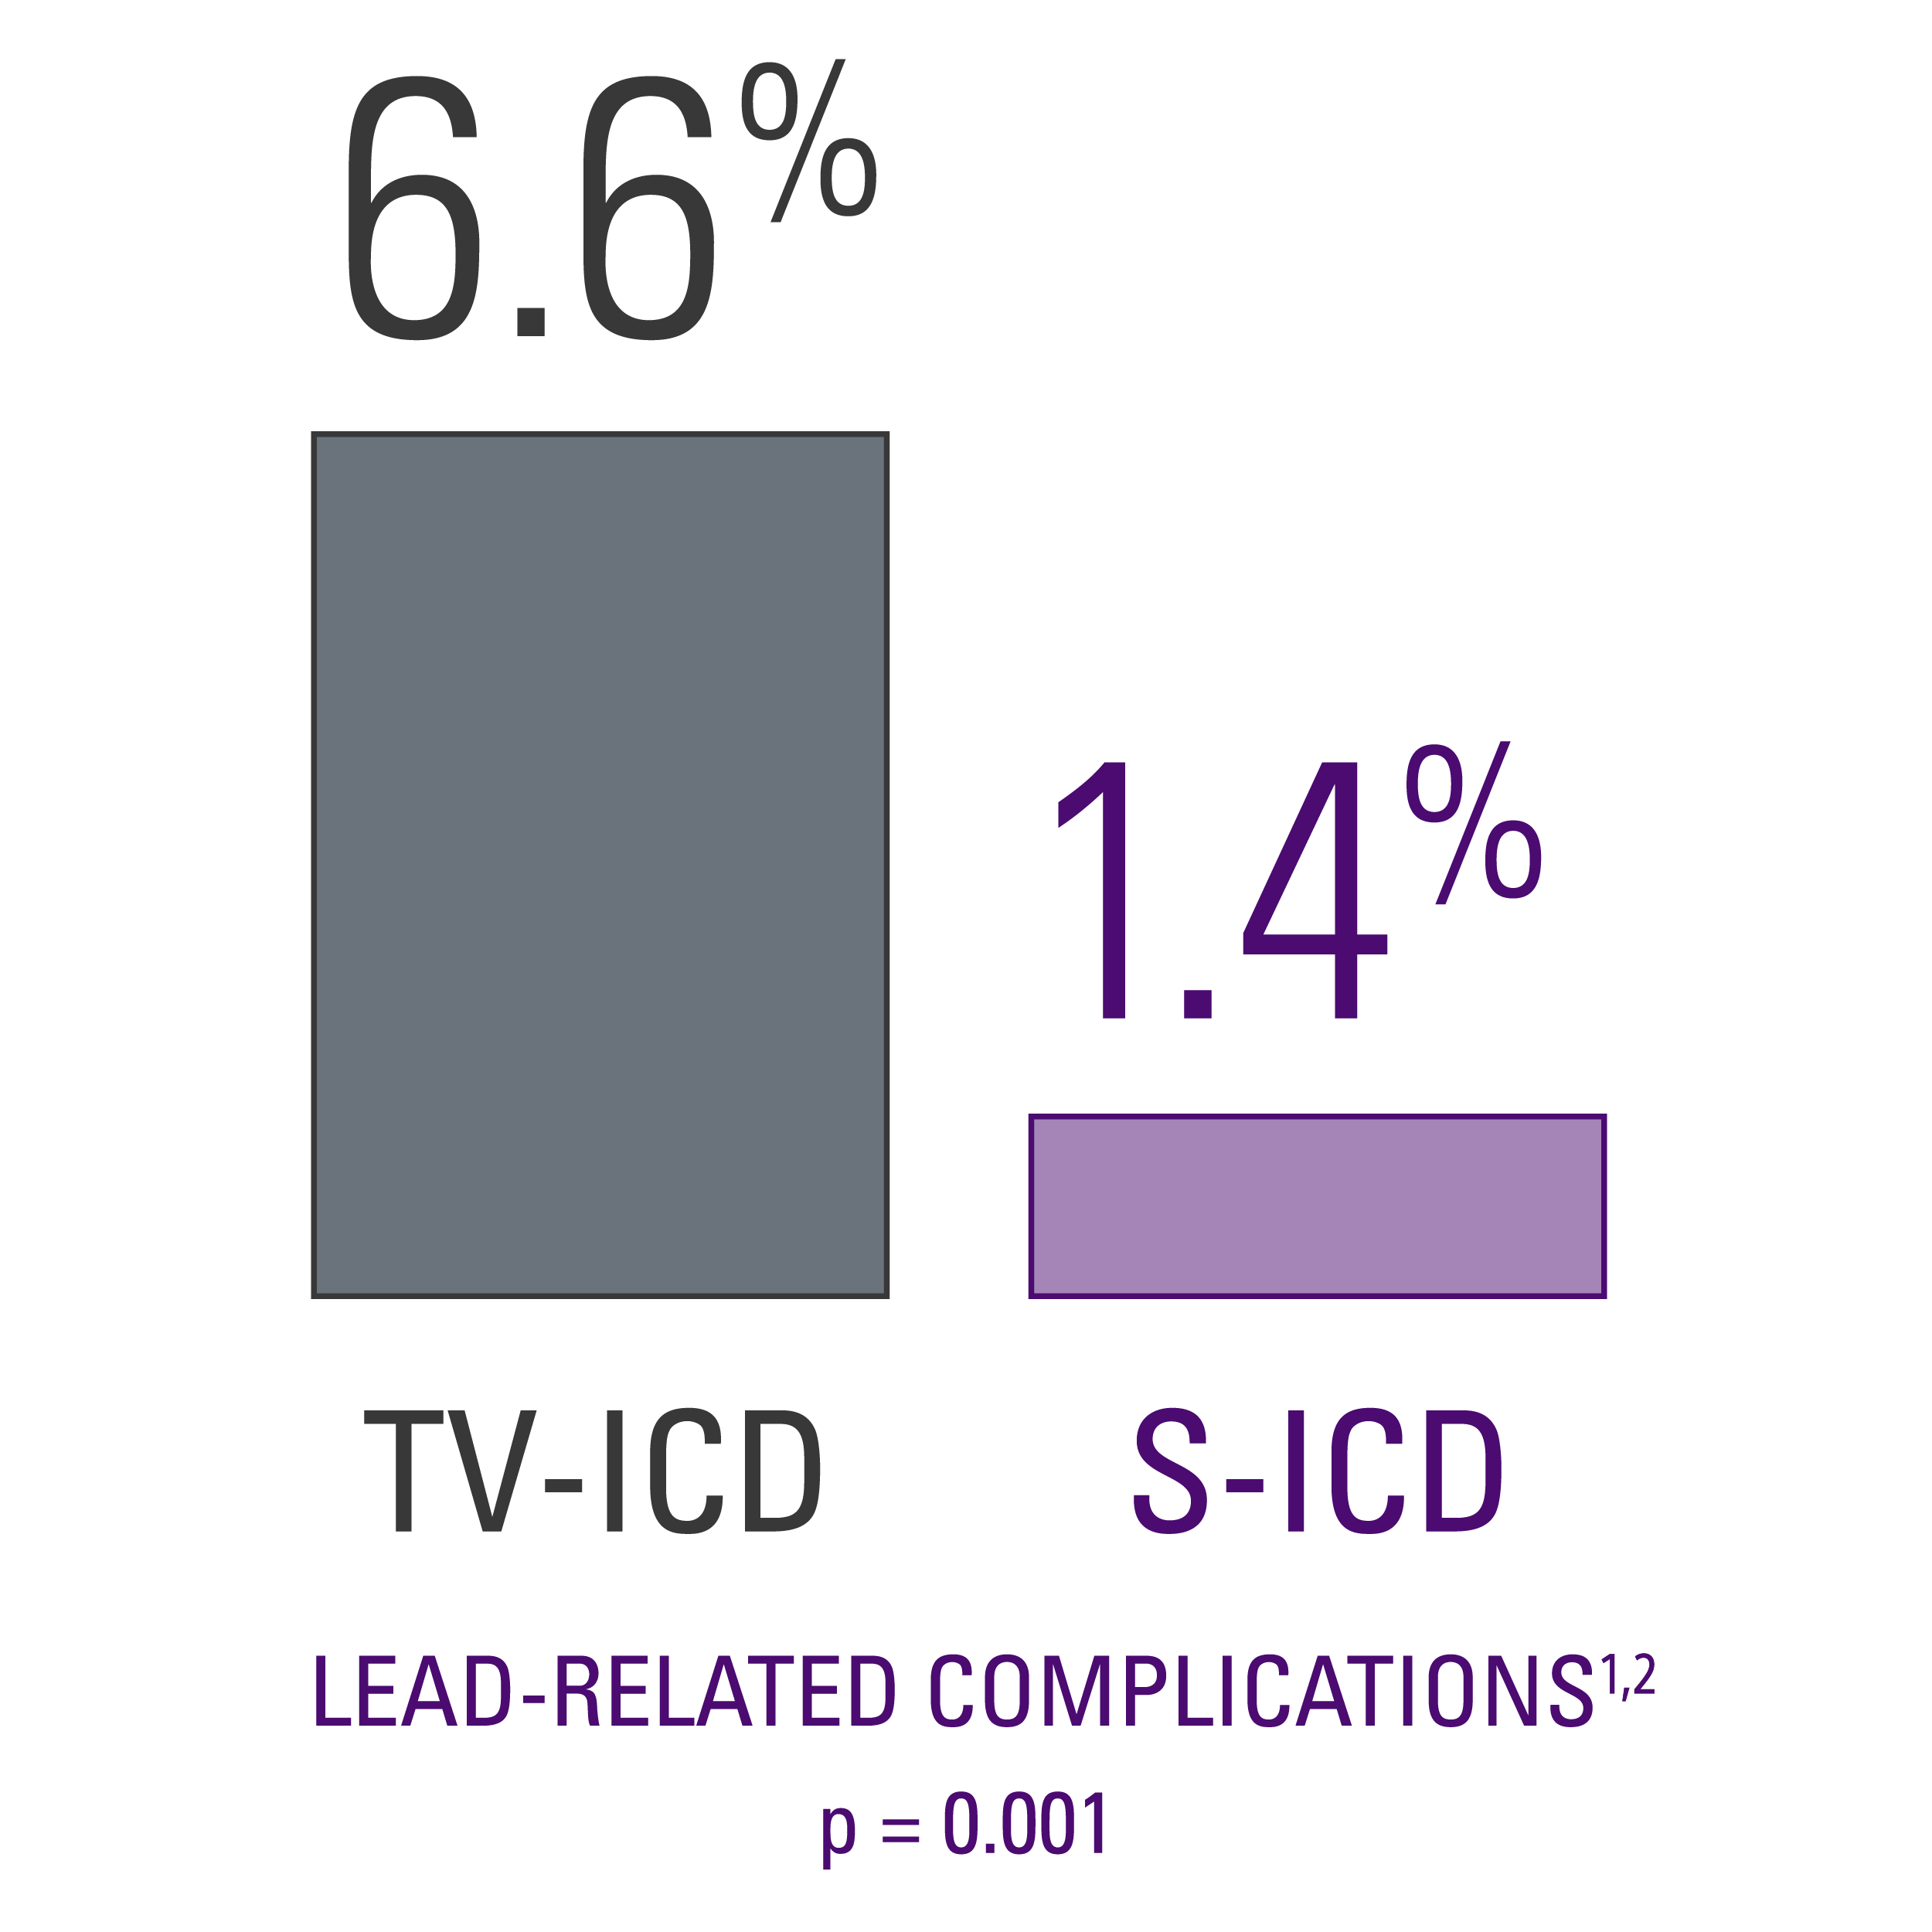 Lead-related complications: 6.6% for TV-ICD and 1.4% for S-ICD.